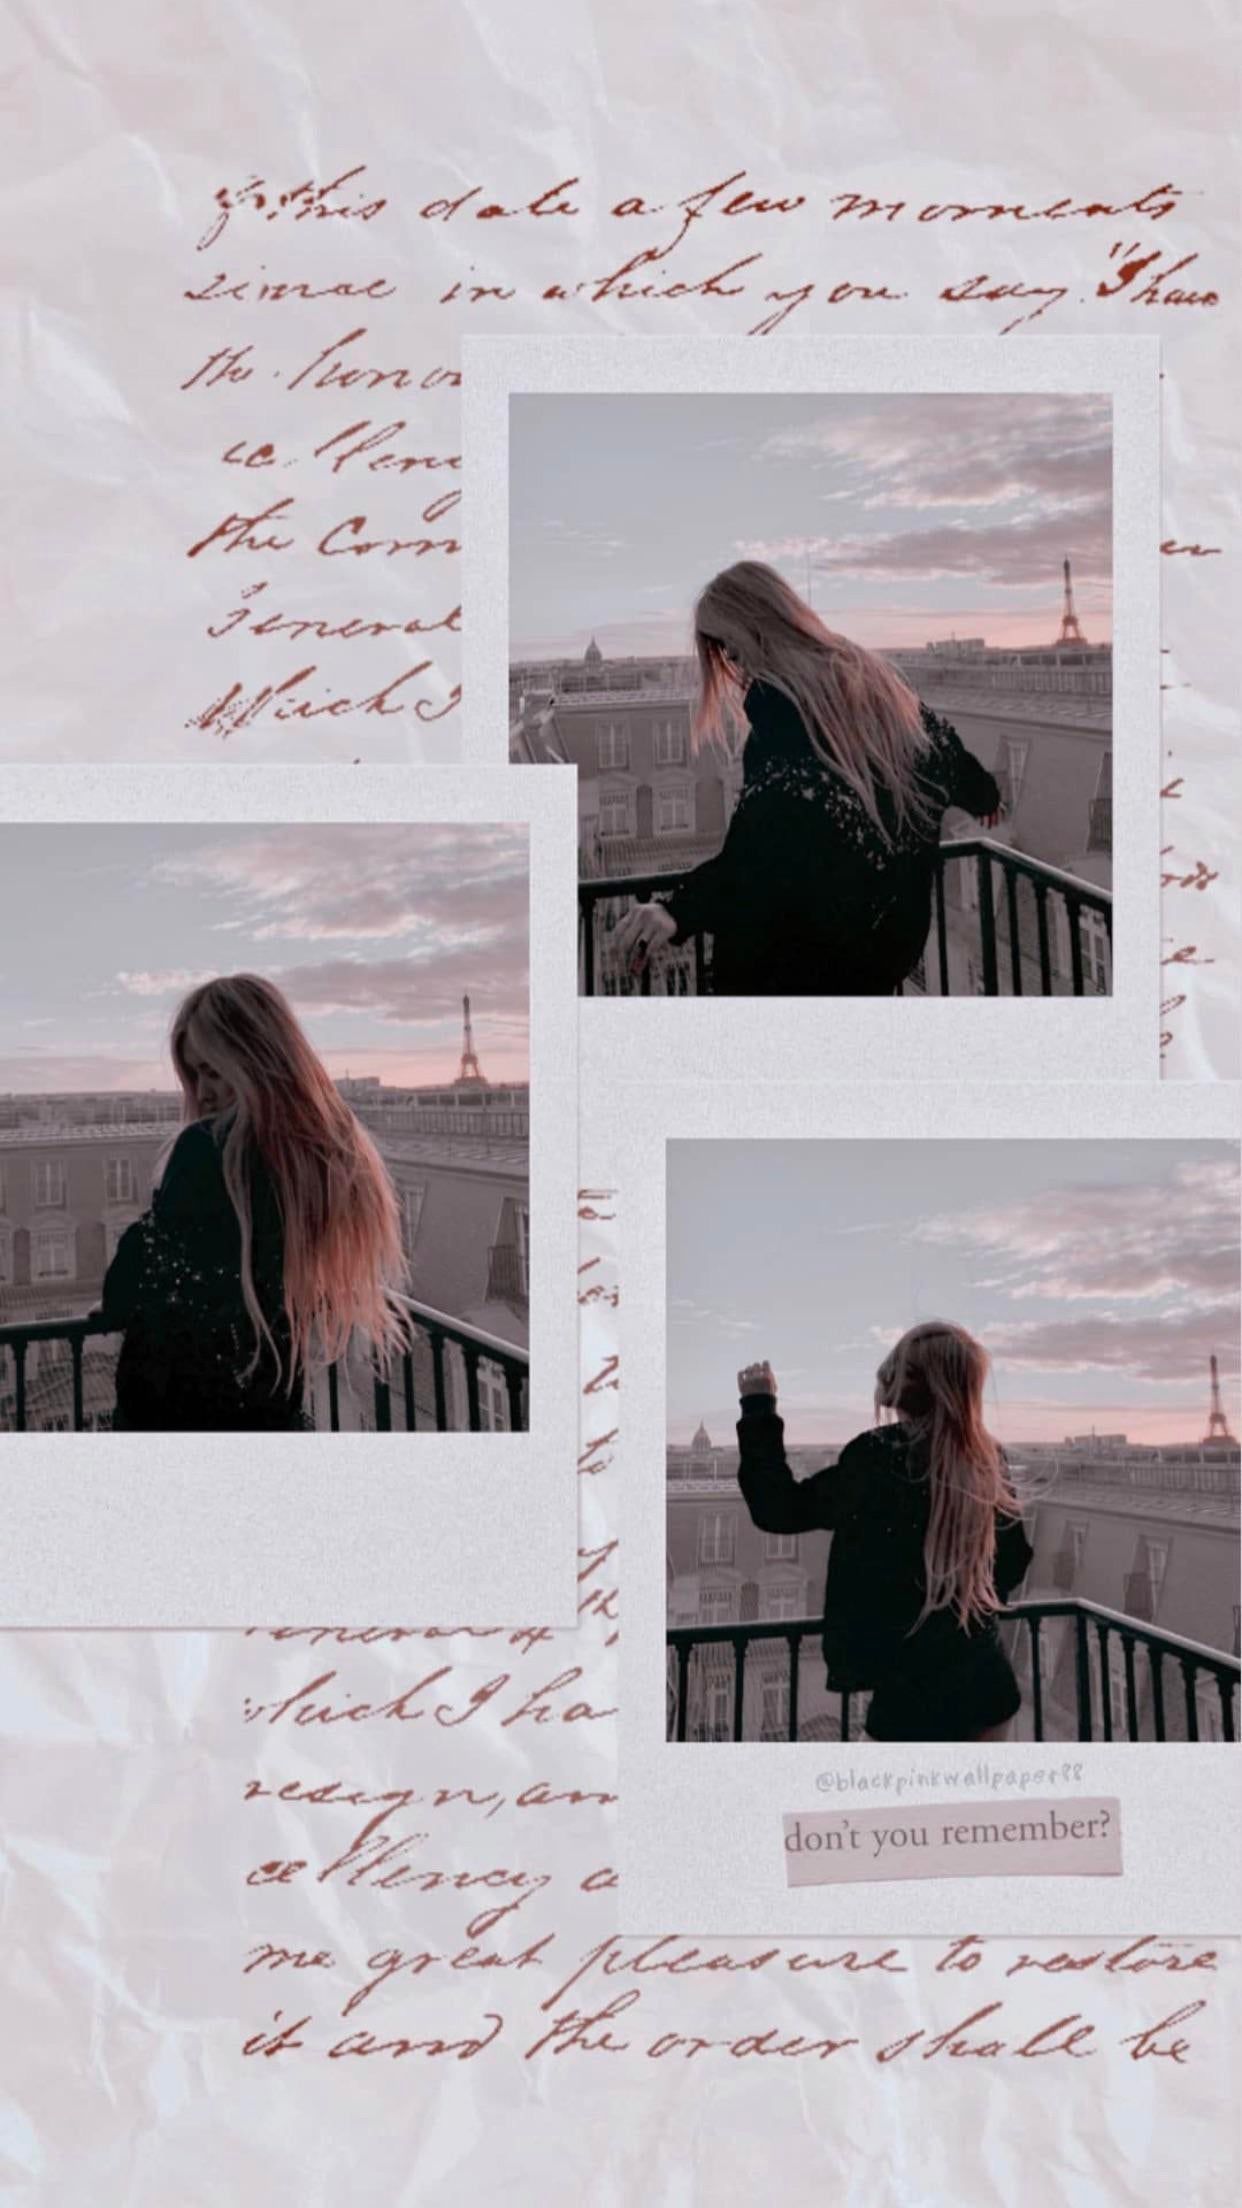 200229: Rosé Wallpaper, thought this was pretty! (via on IG)